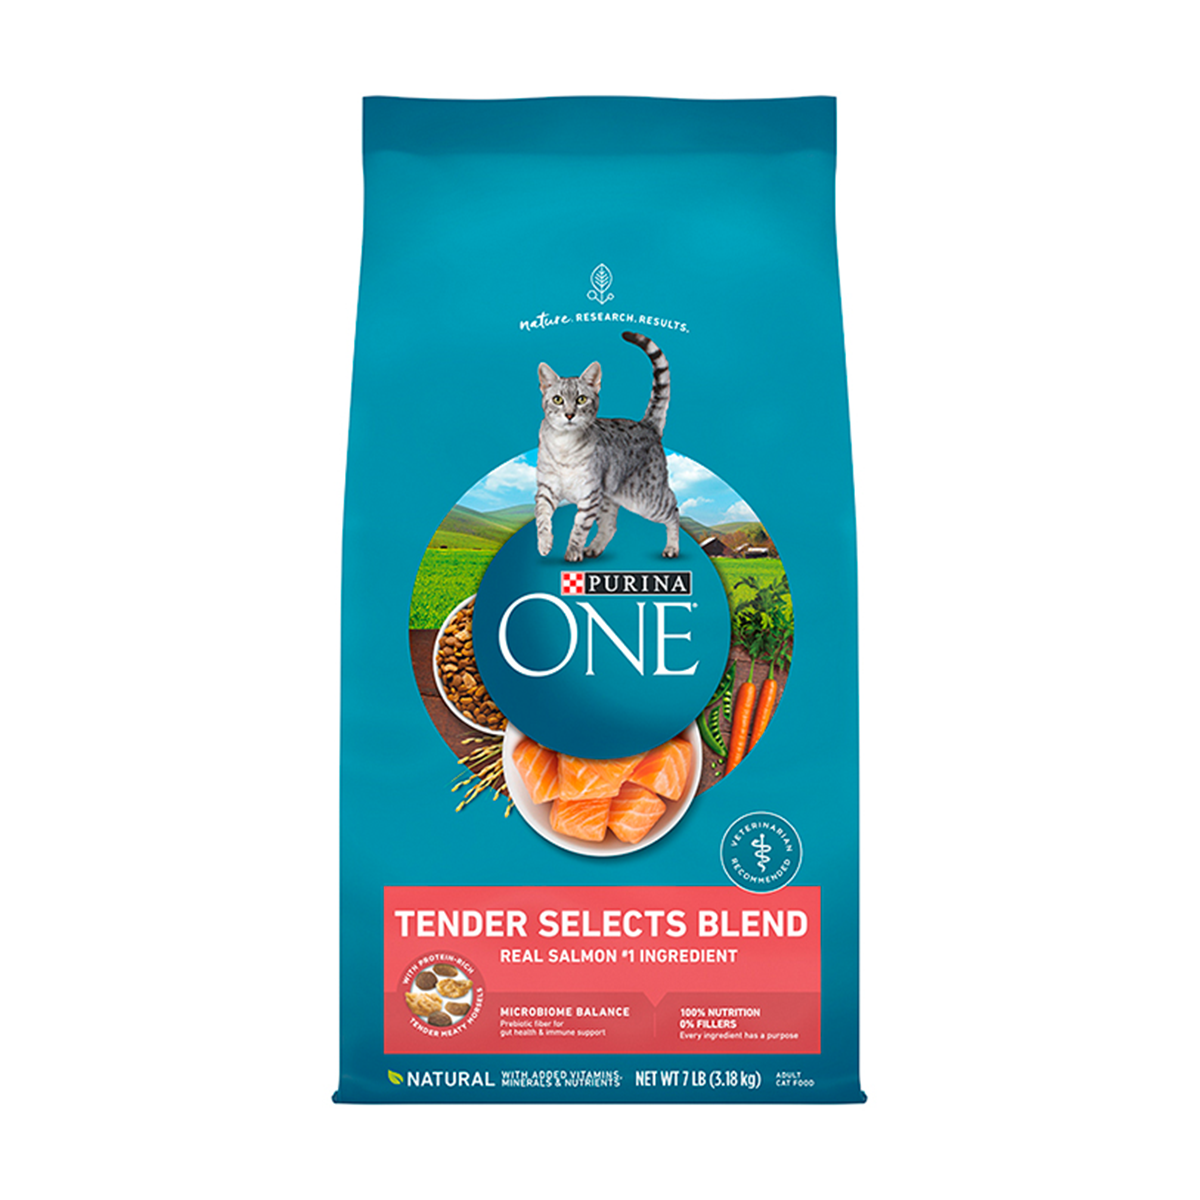 purina-one-dry-cat-tender-selects-blend-salmon-01.png